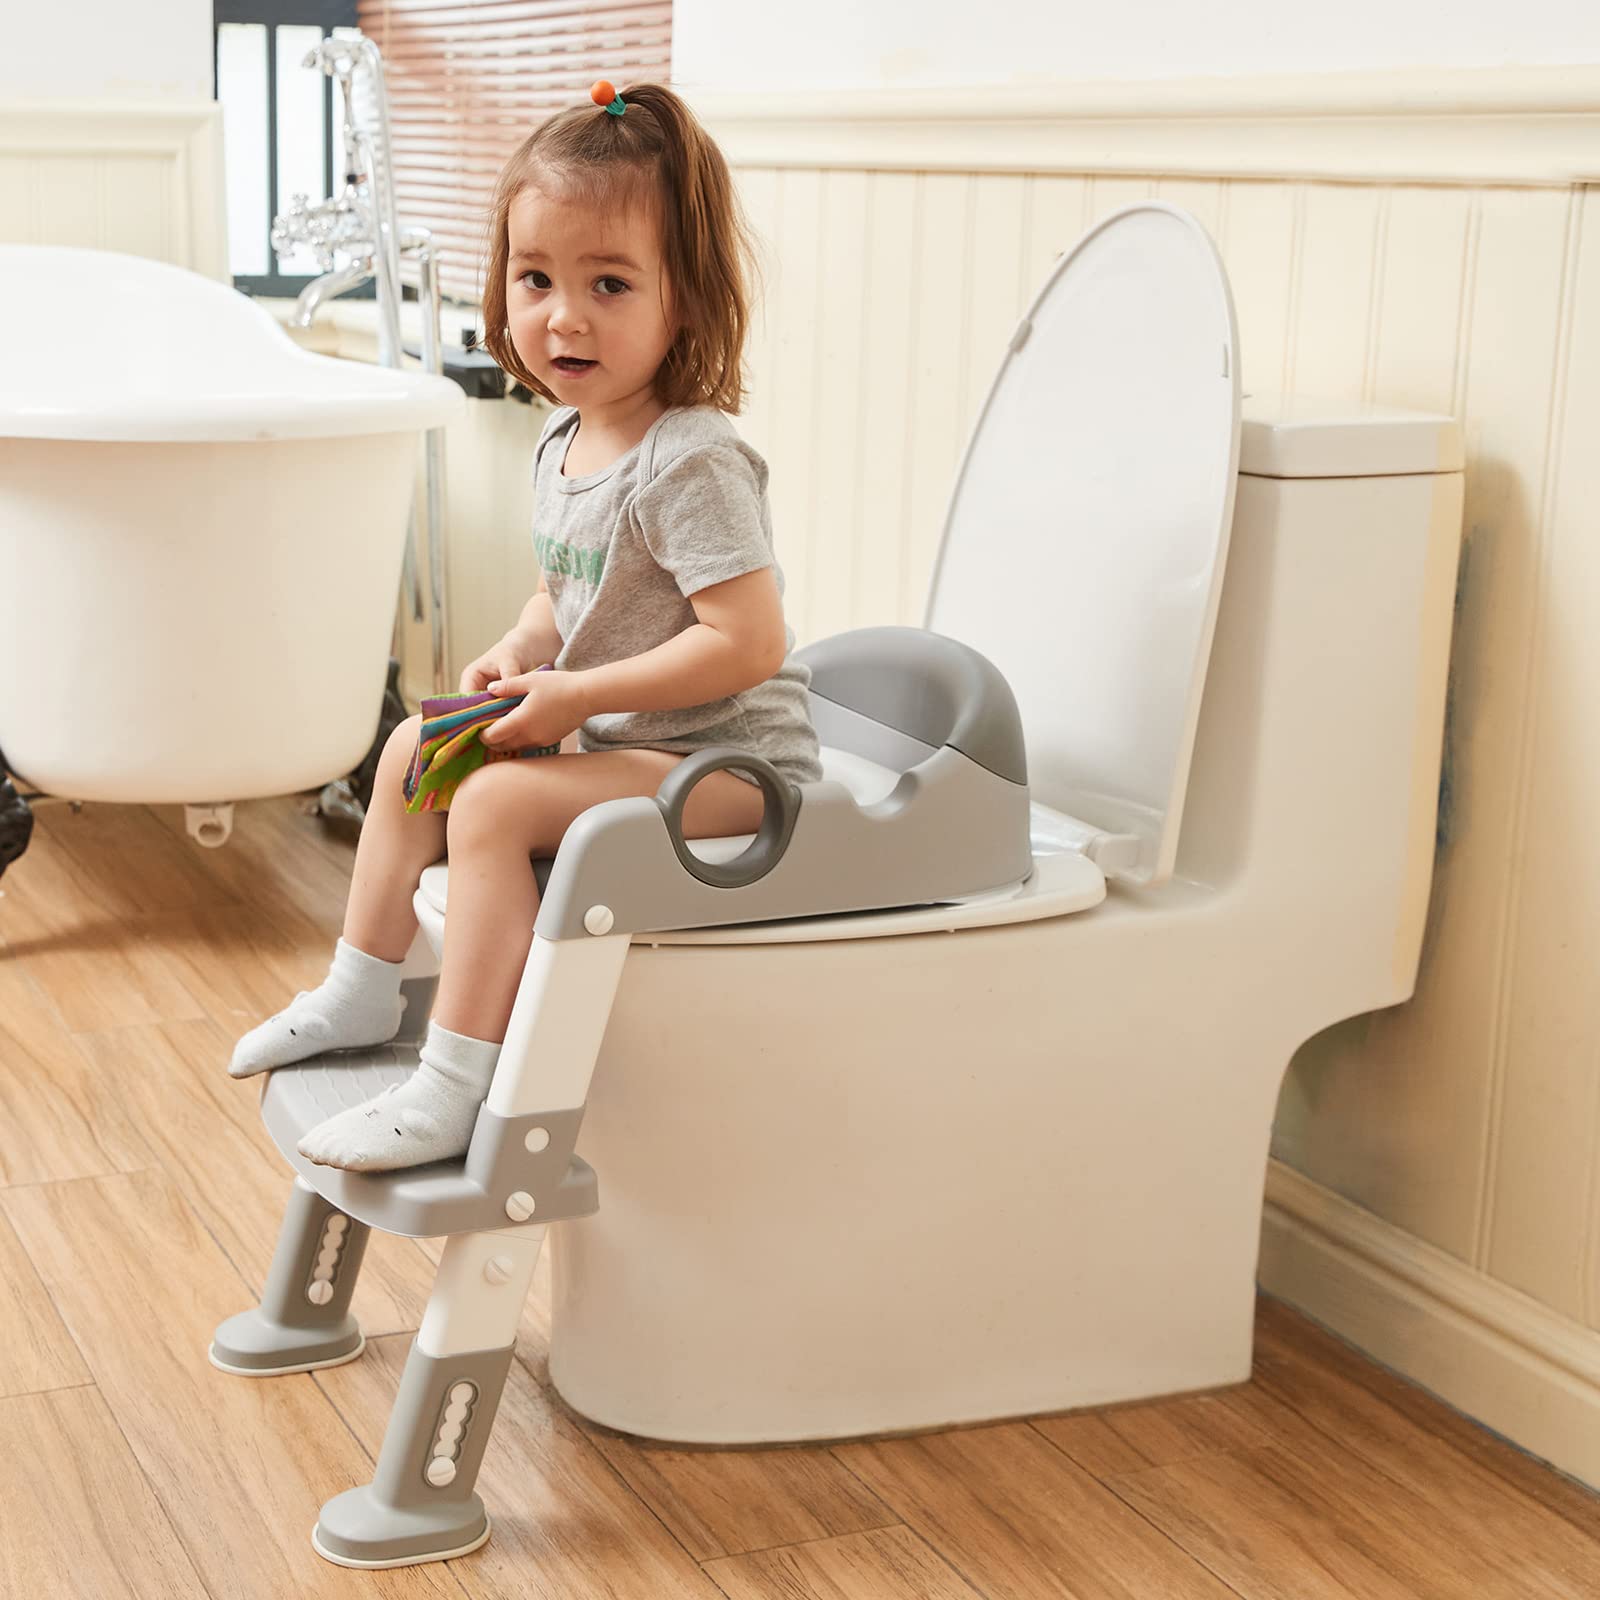 toilet training seats and potties for babies and toddlers 5 colors baby potty training seat kids cute plastic potty pot toilet